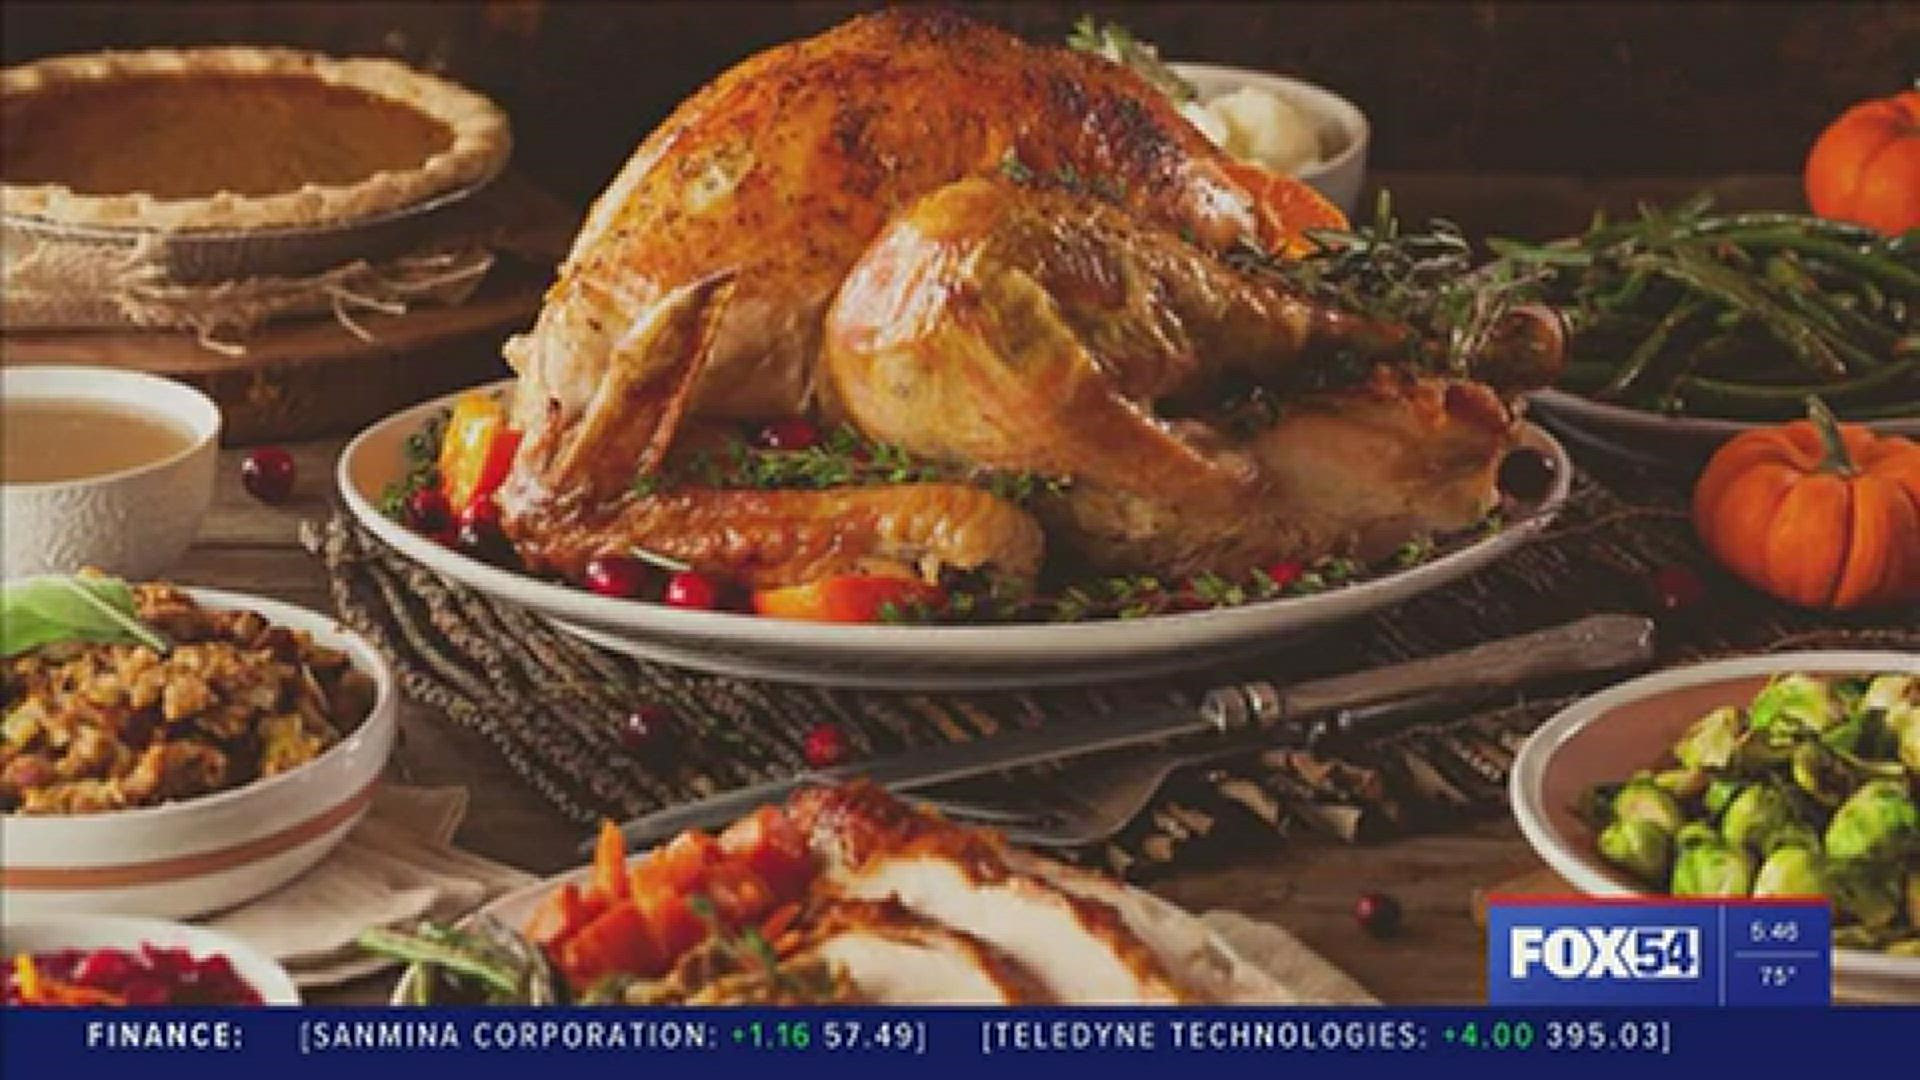 Our Ken McCoy spoke with a dietician to make sure no holiday leftovers go to waste.